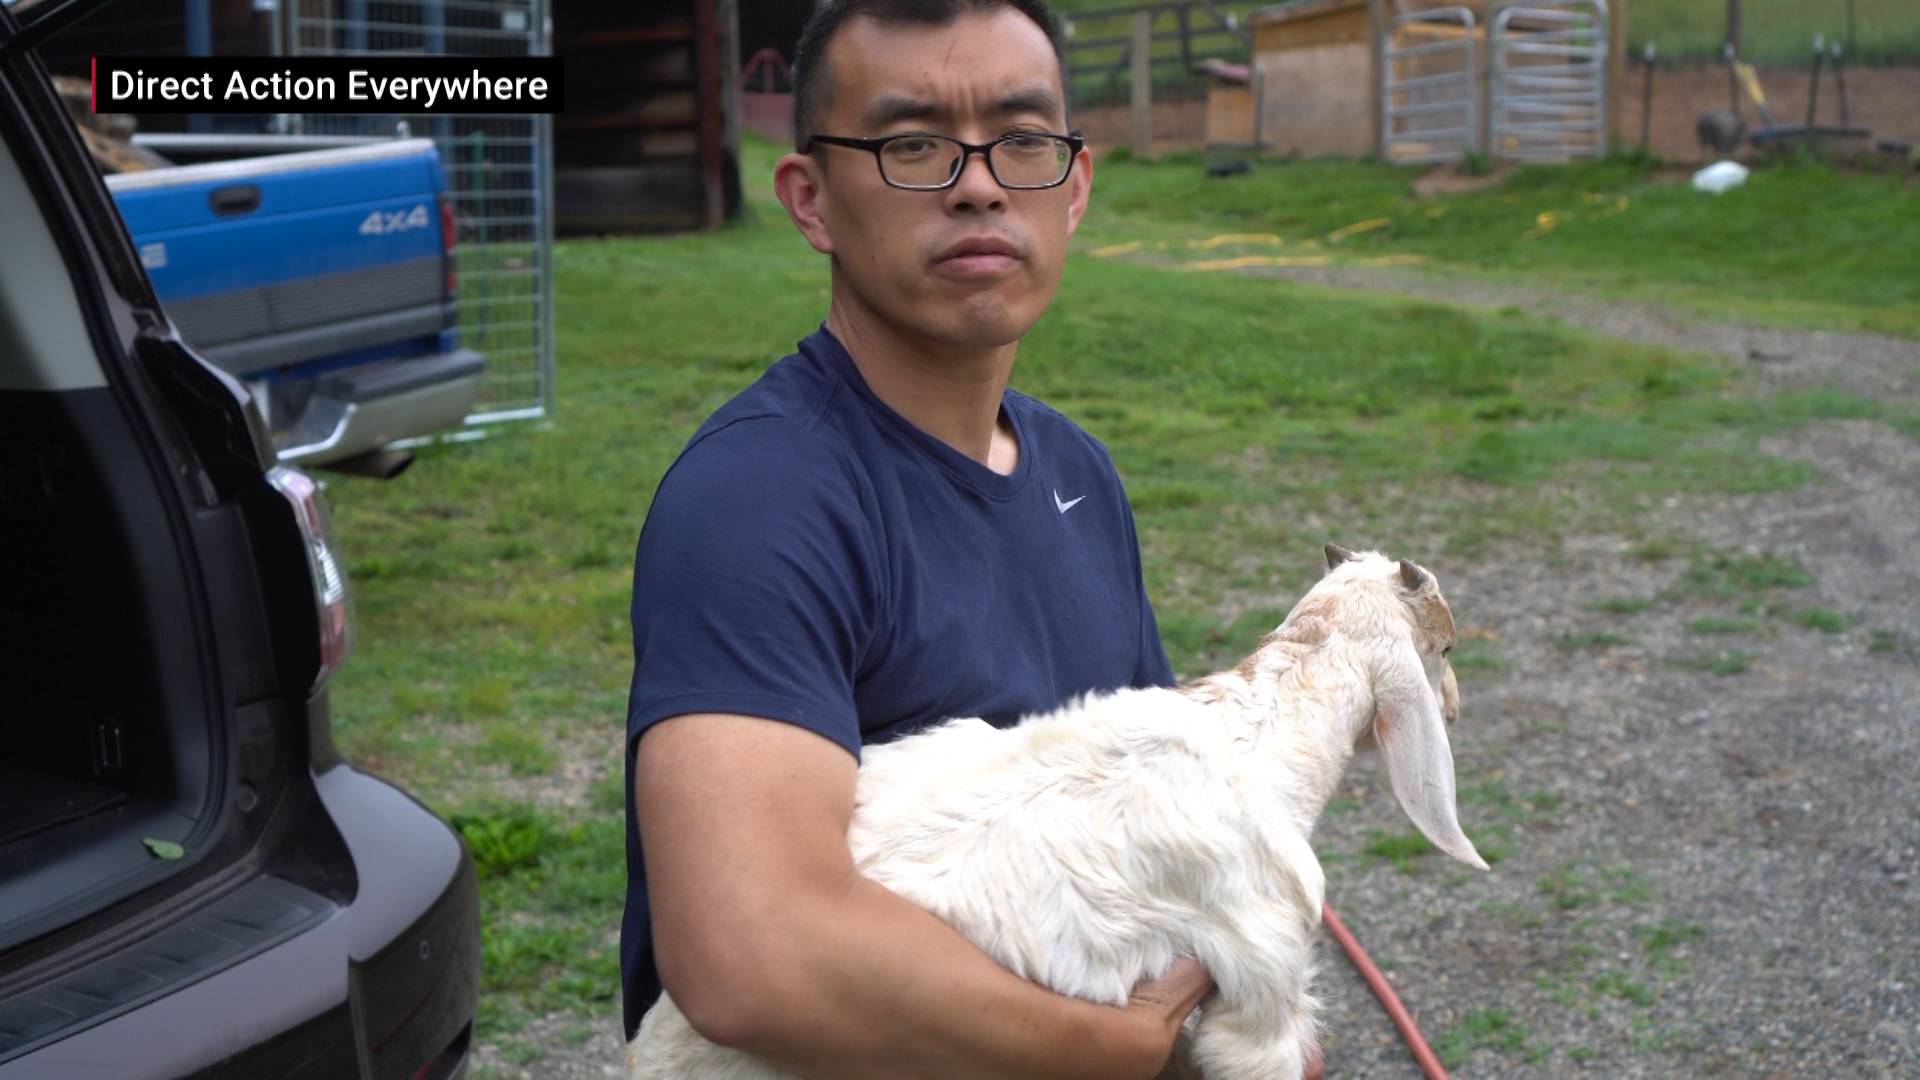 Animal Rights Defender Wayne Hsiung Convicted of Felony for Rescuing Factory Farm Animals